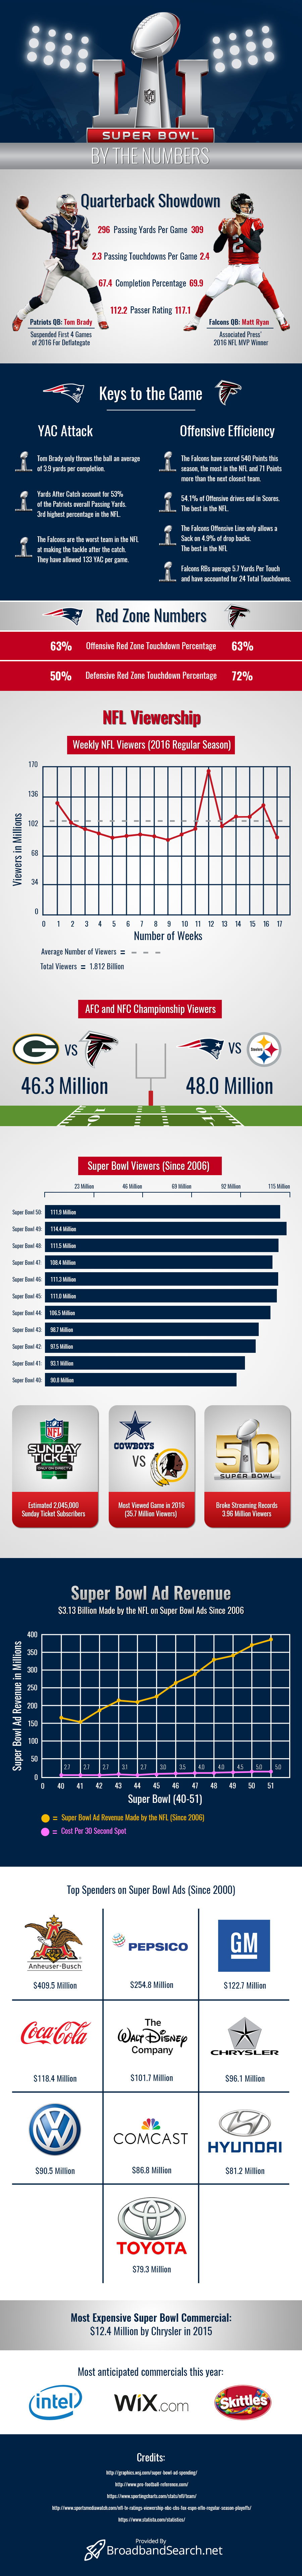 super-bowl-preview-infographic